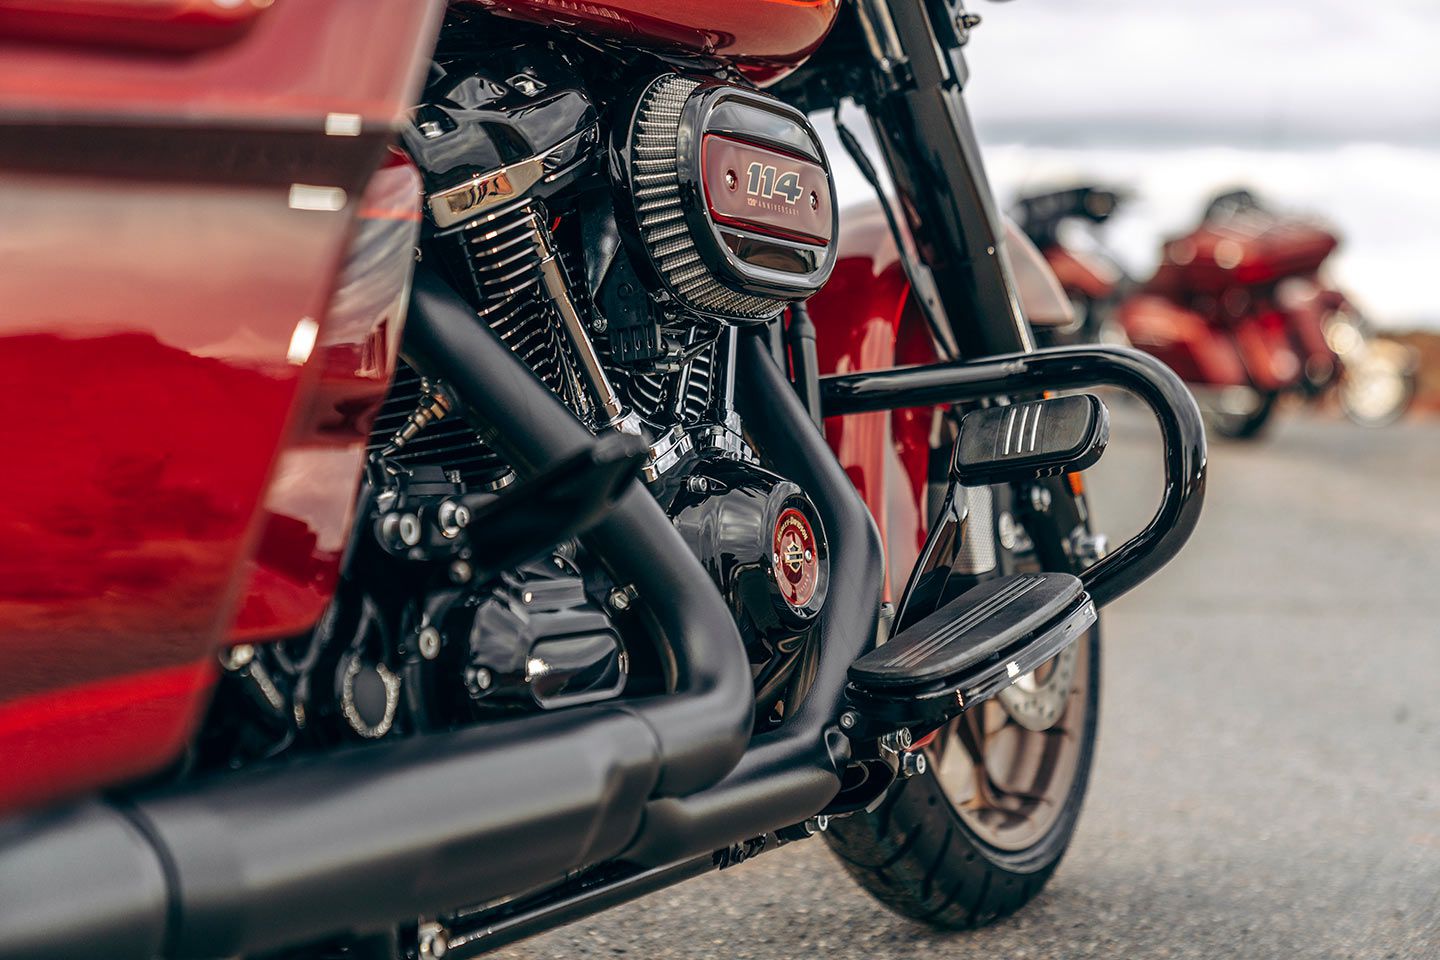 The FLHTKANV’s 114ci V-twin routes the 2-1-2 exhaust through tapered mufflers for Harley’s signature sound. Blackout trim and selective chroming round out the visuals.